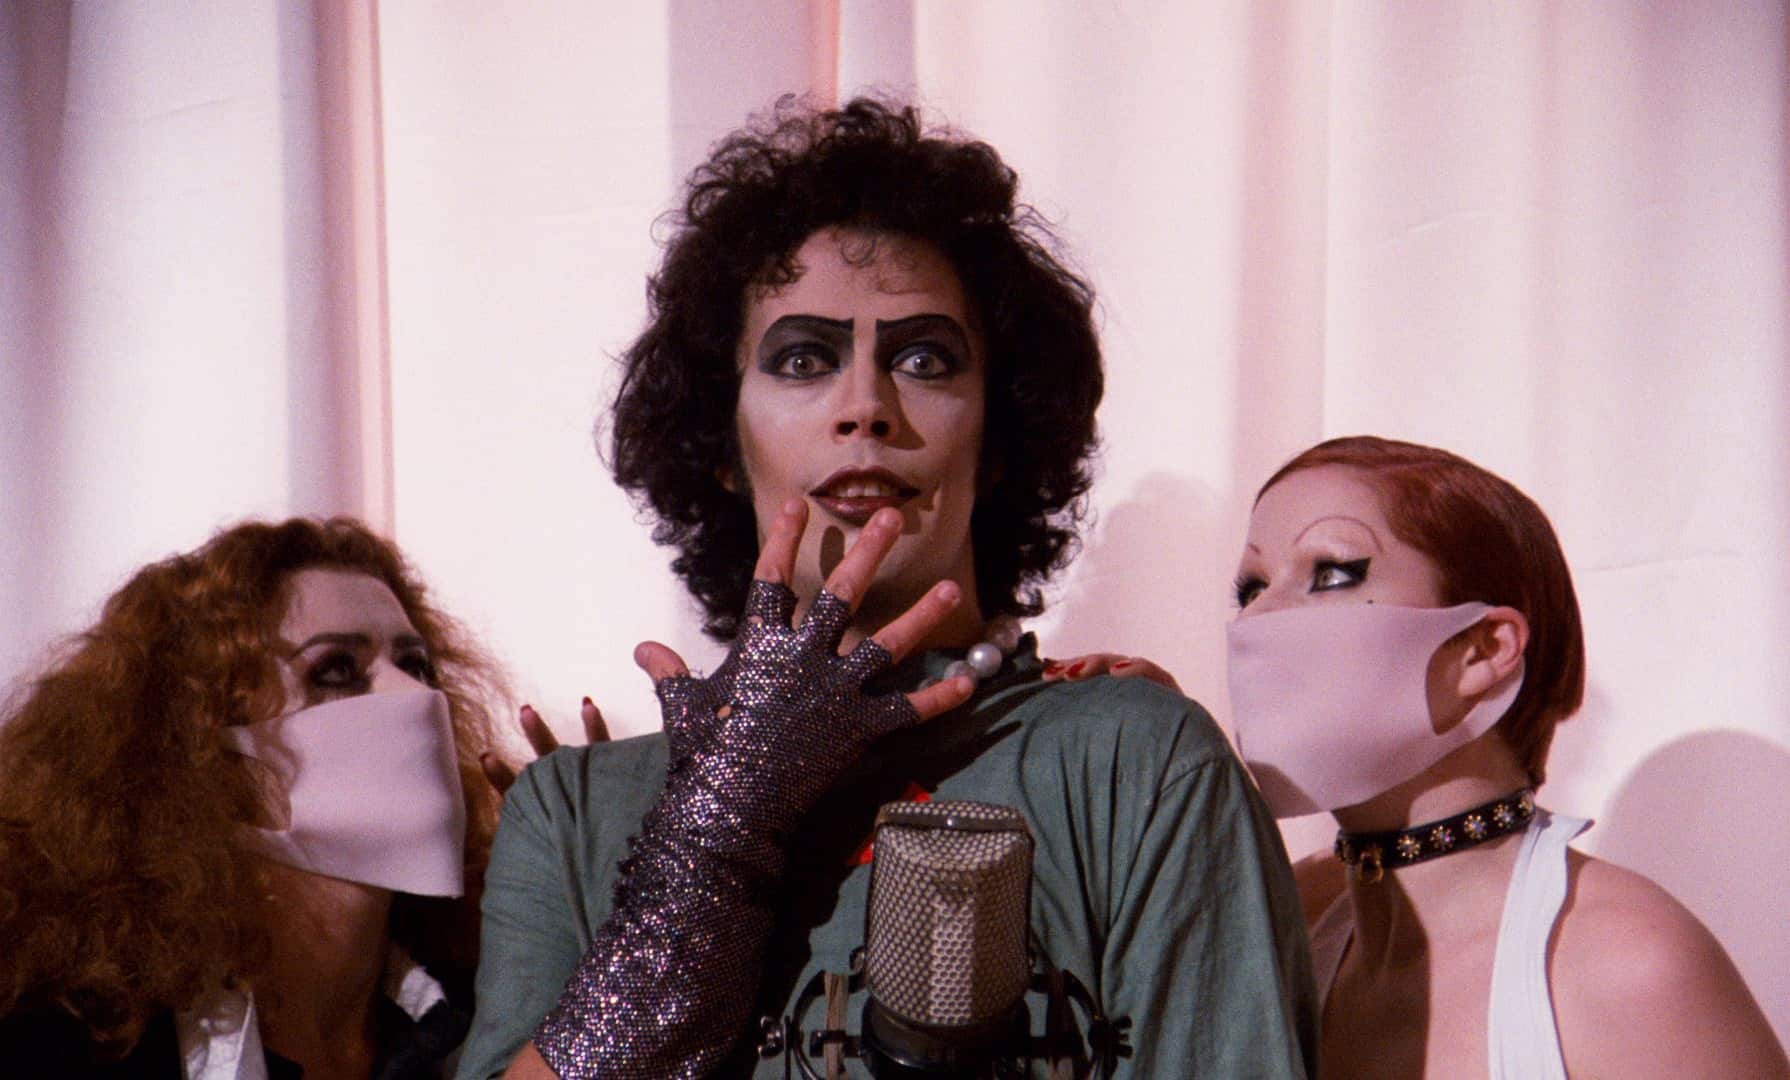 Dr Frankenfurter stands with two people on either side of him, he wears a green scrubs and gloves.